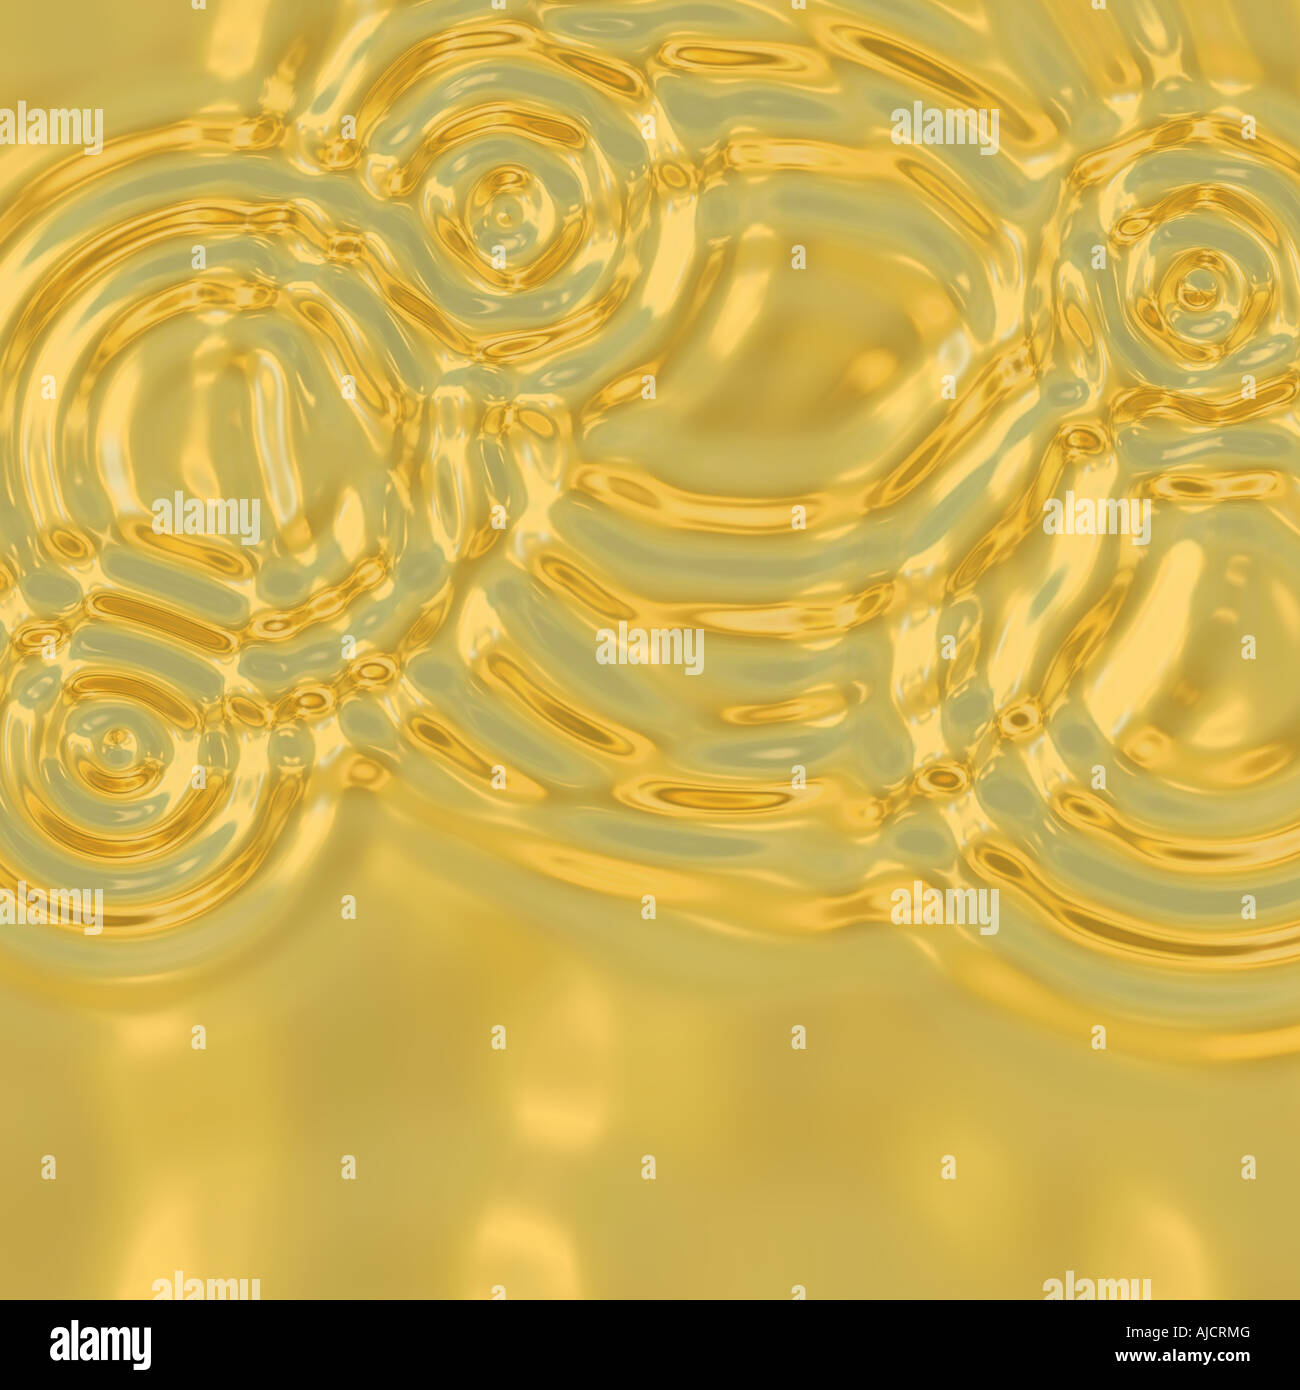 a very large illustration of ripples in molten gold metal Stock Photo